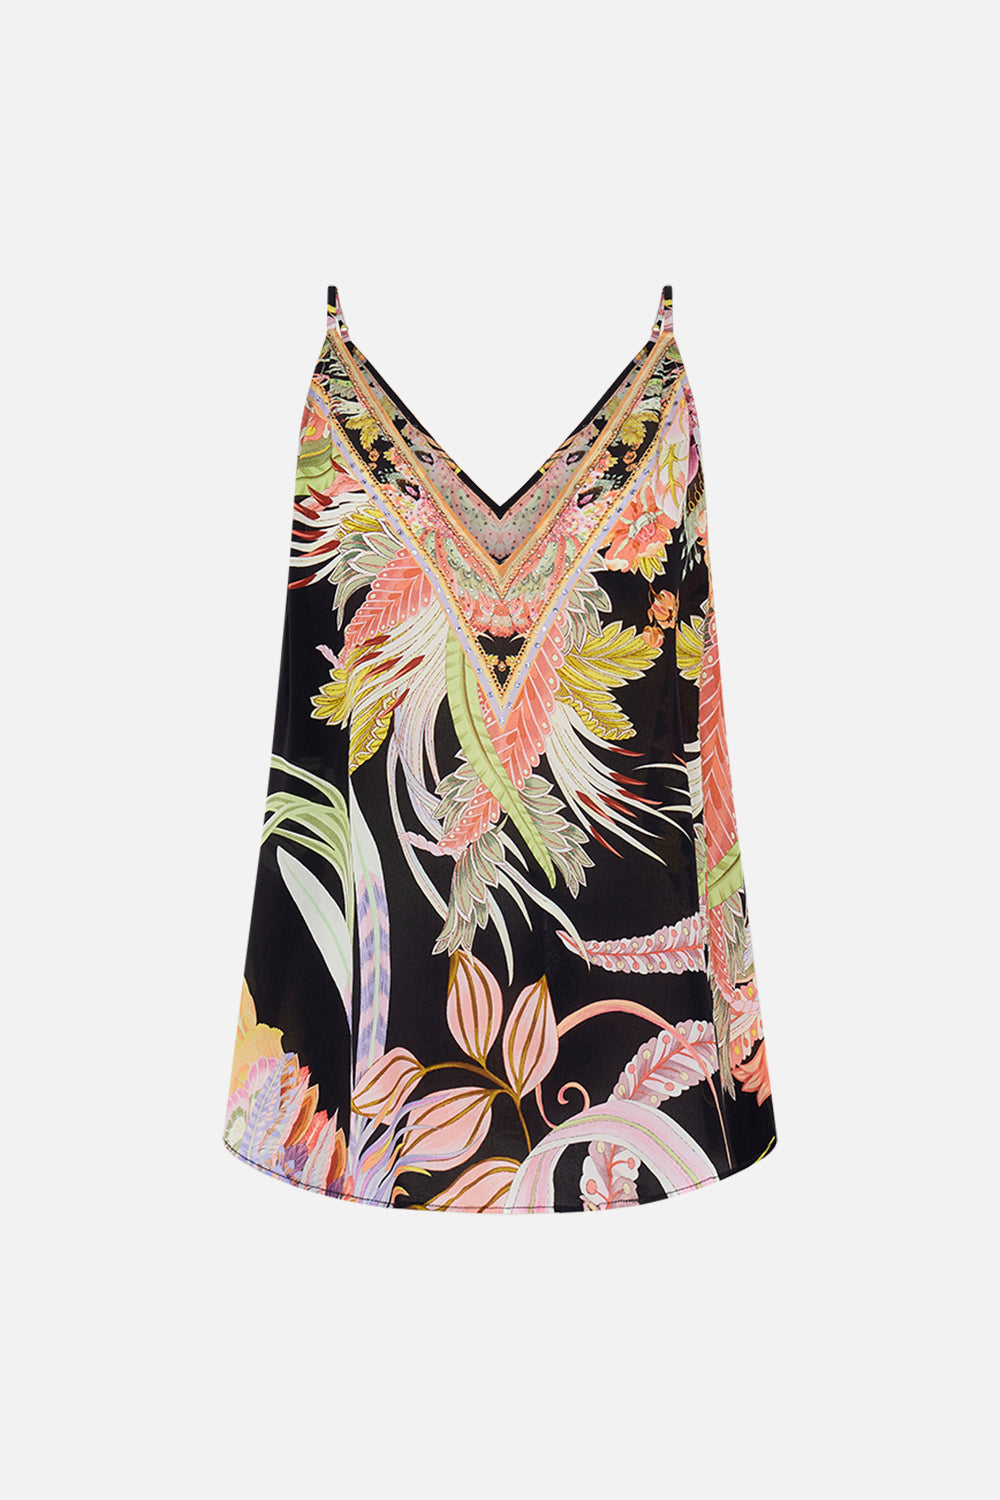 Product view of CAMILLA silk v neck cami in lady Of the moon print